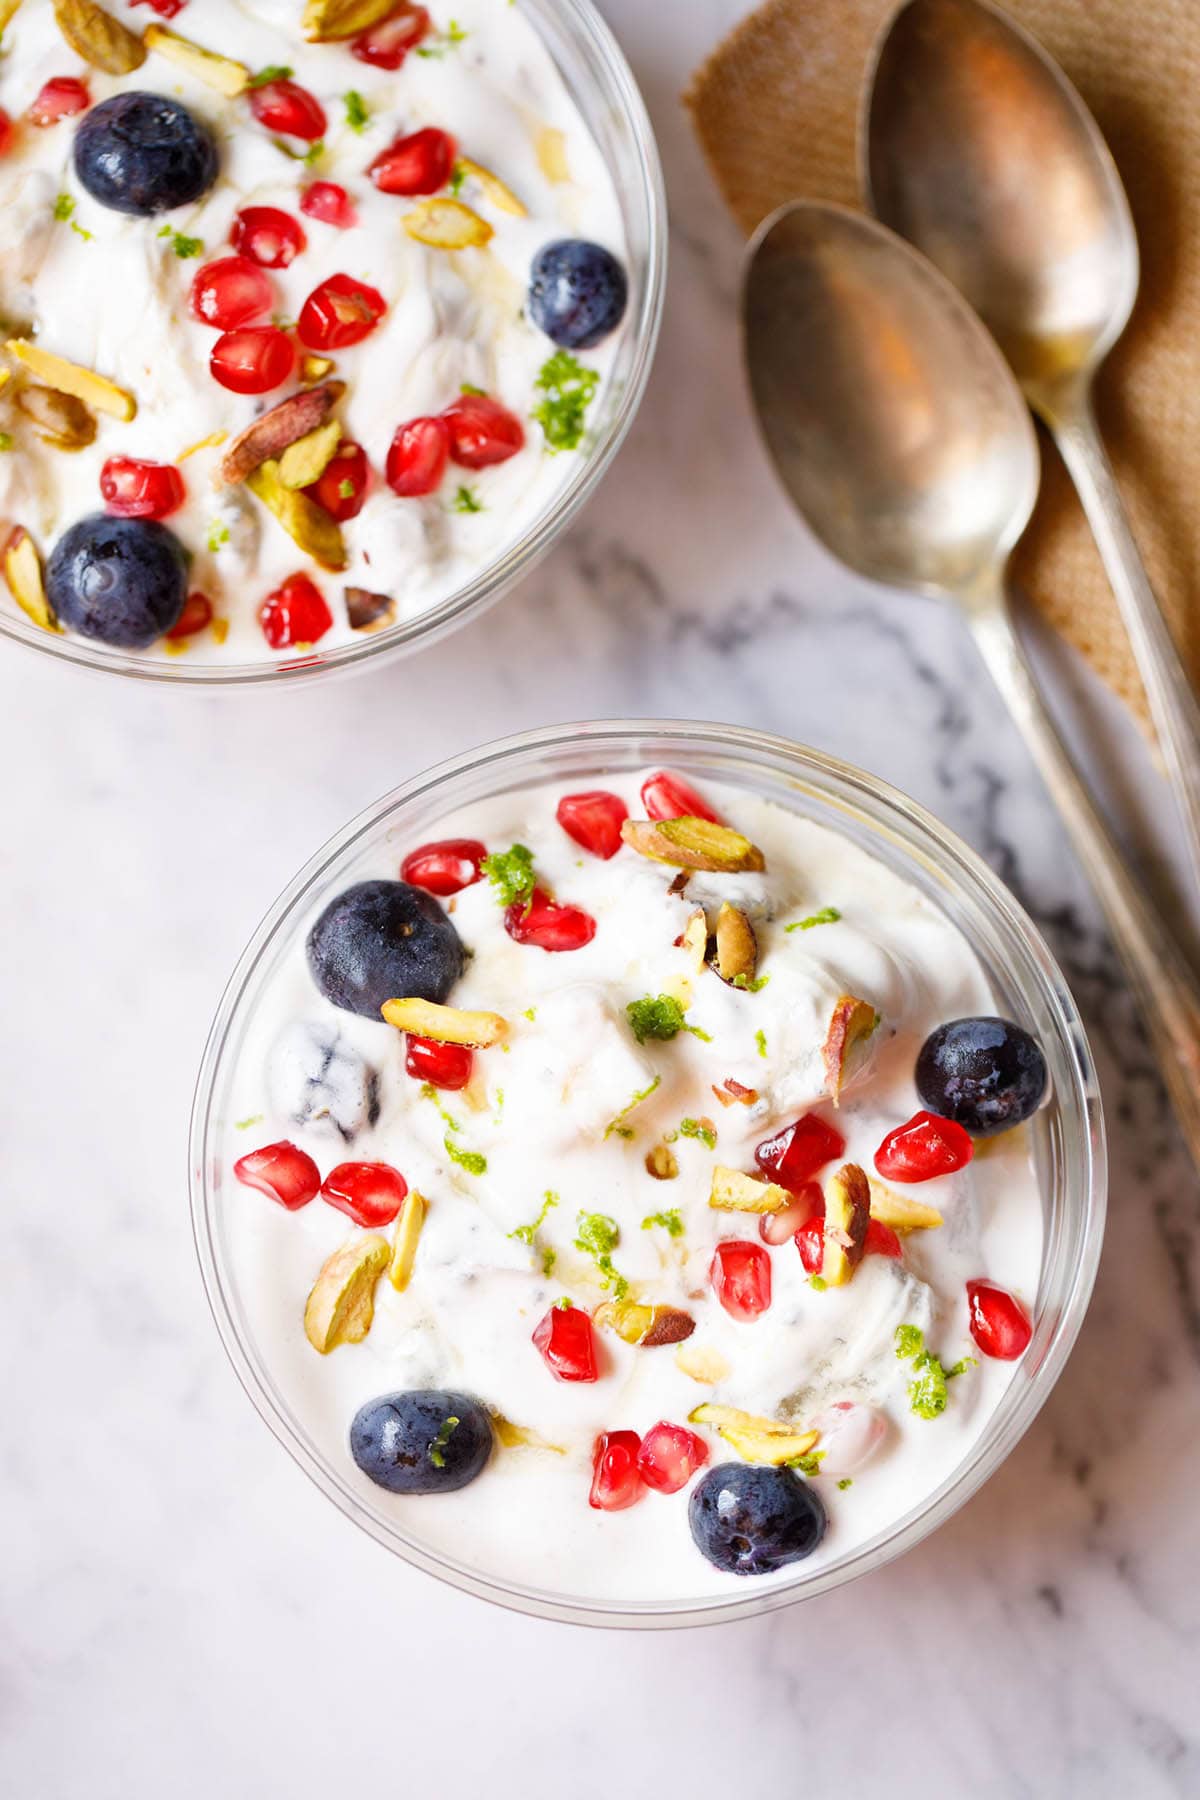 fruit cream in glass bowls with dessert spoons by the side